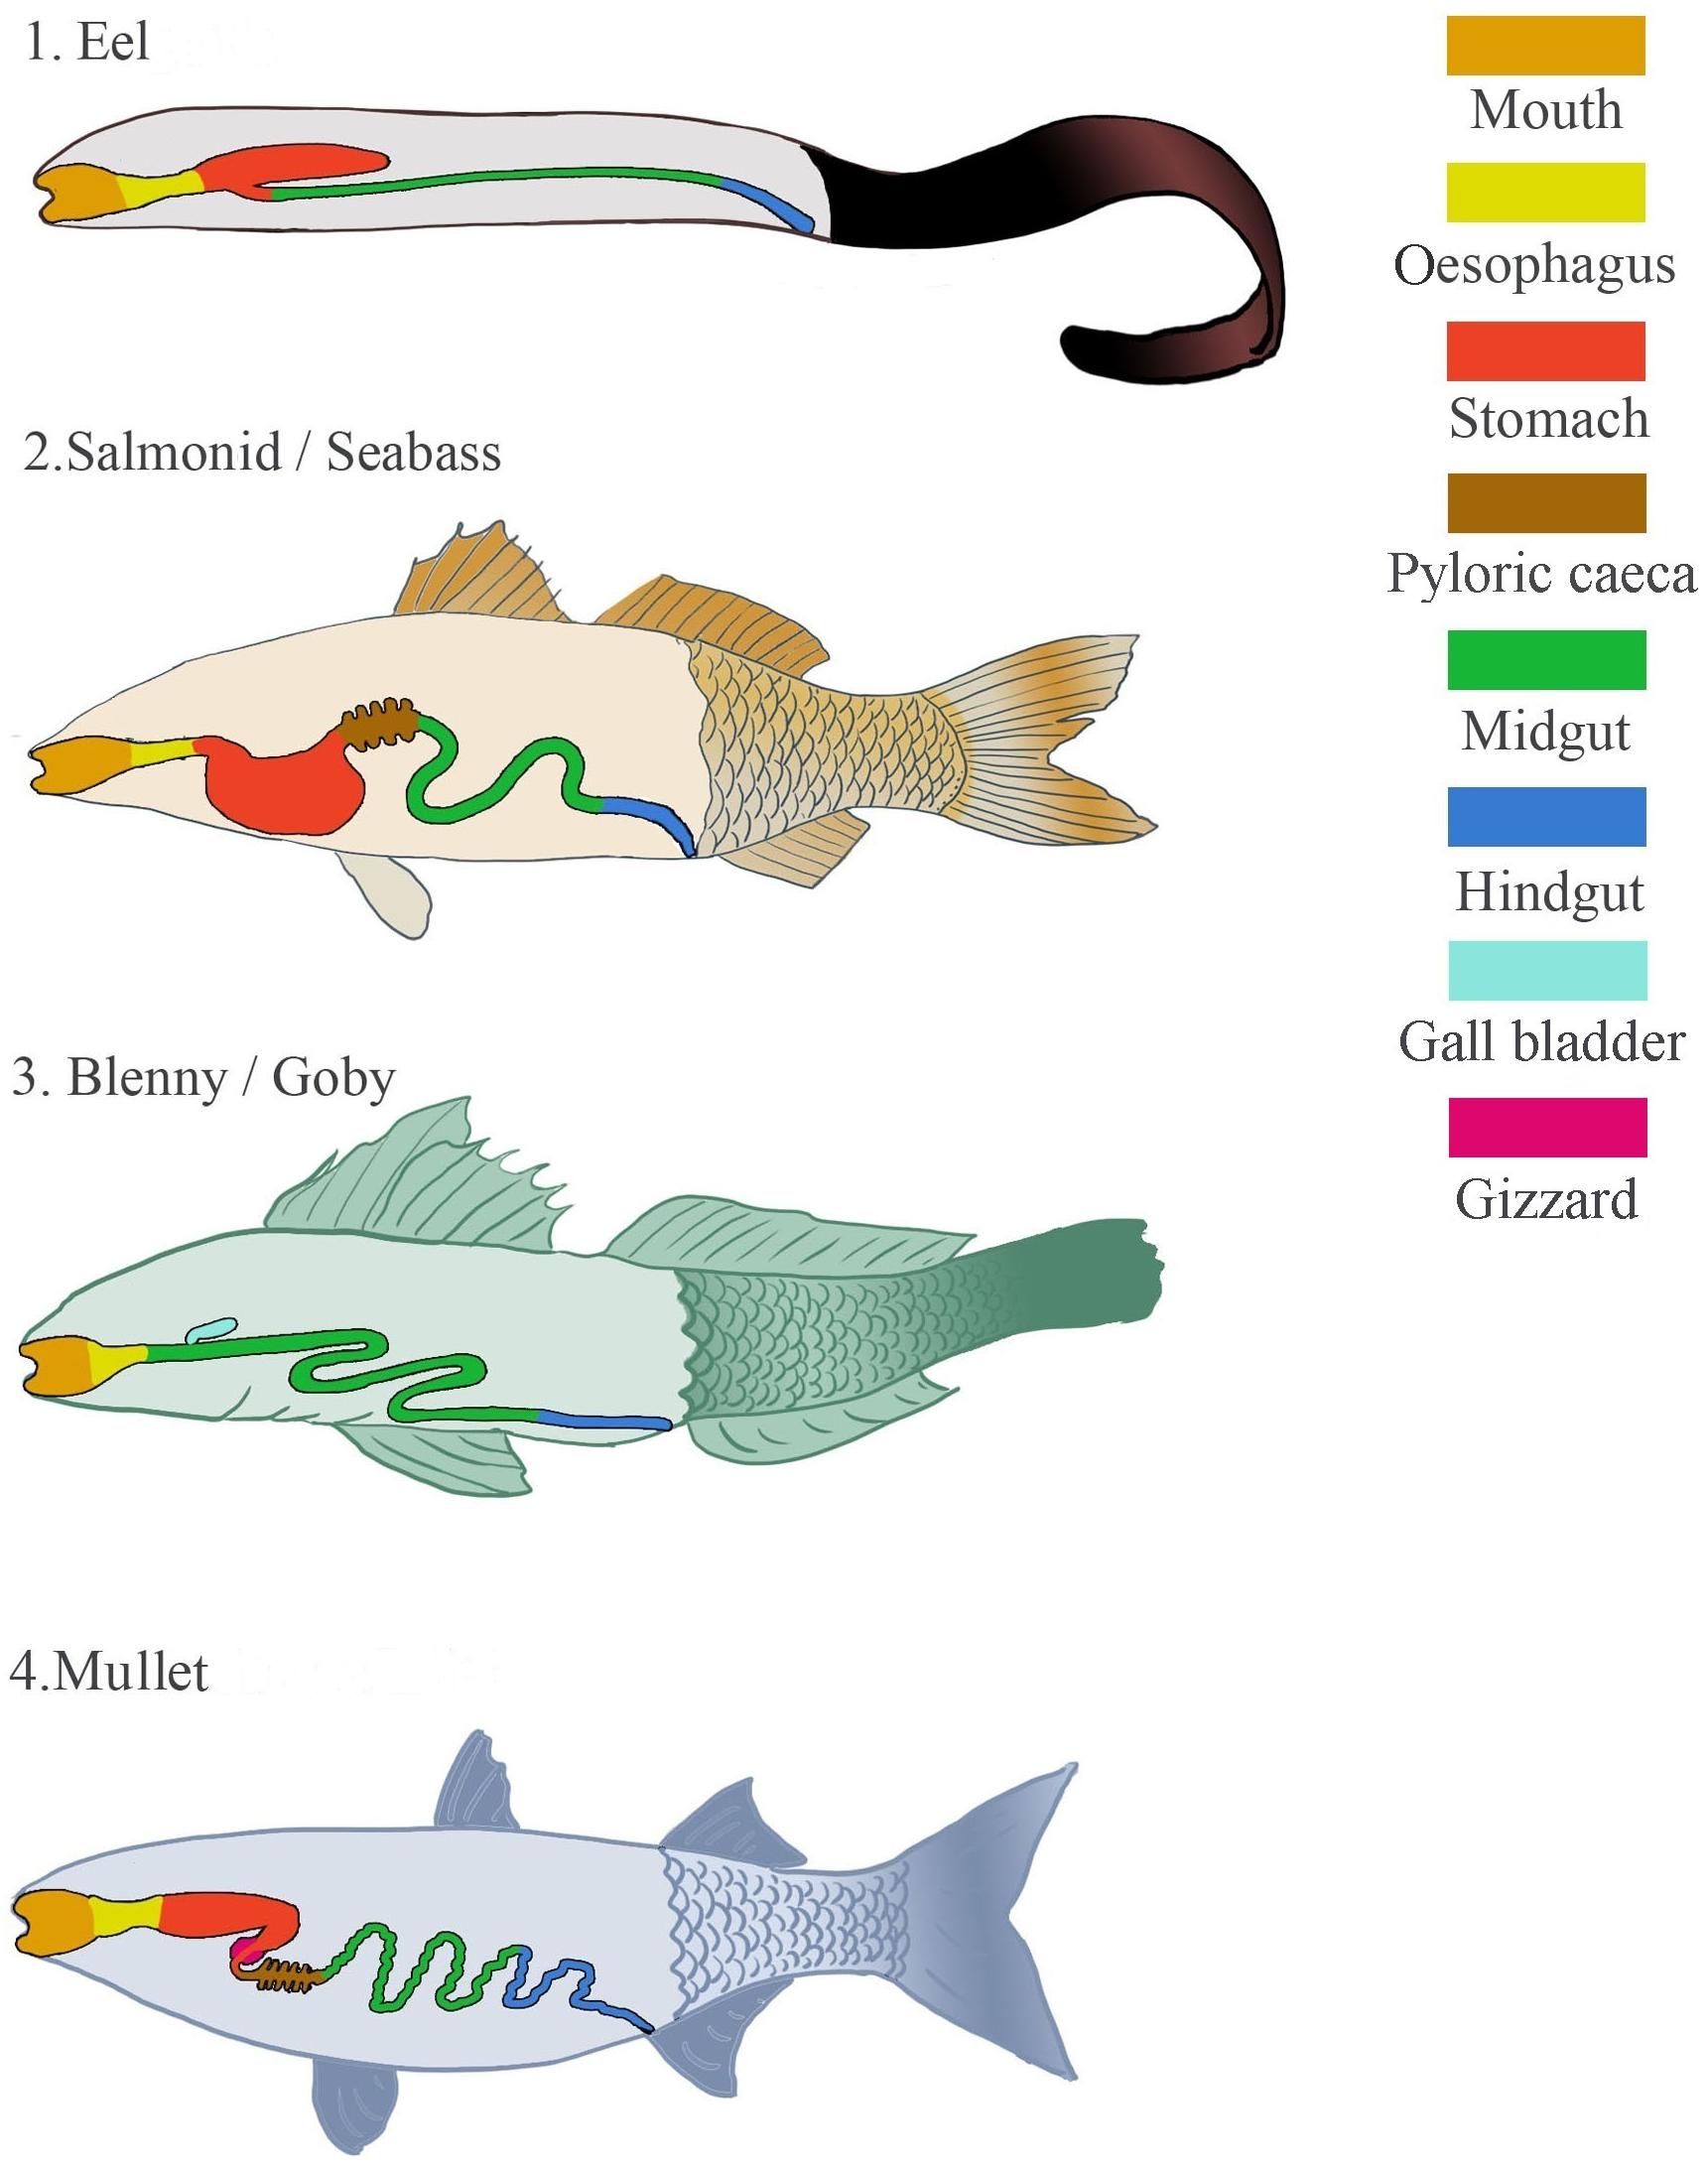 Frontiers | The Gut Microbiota of Marine Fish